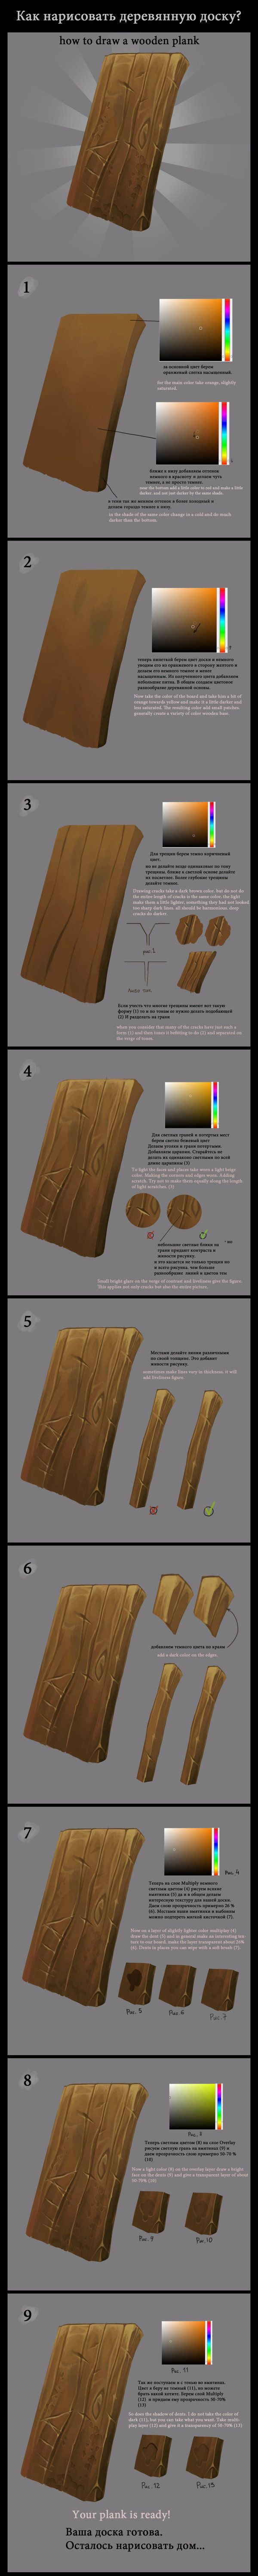 How to draw wooden plank? by Gimaldinov on Deviant...